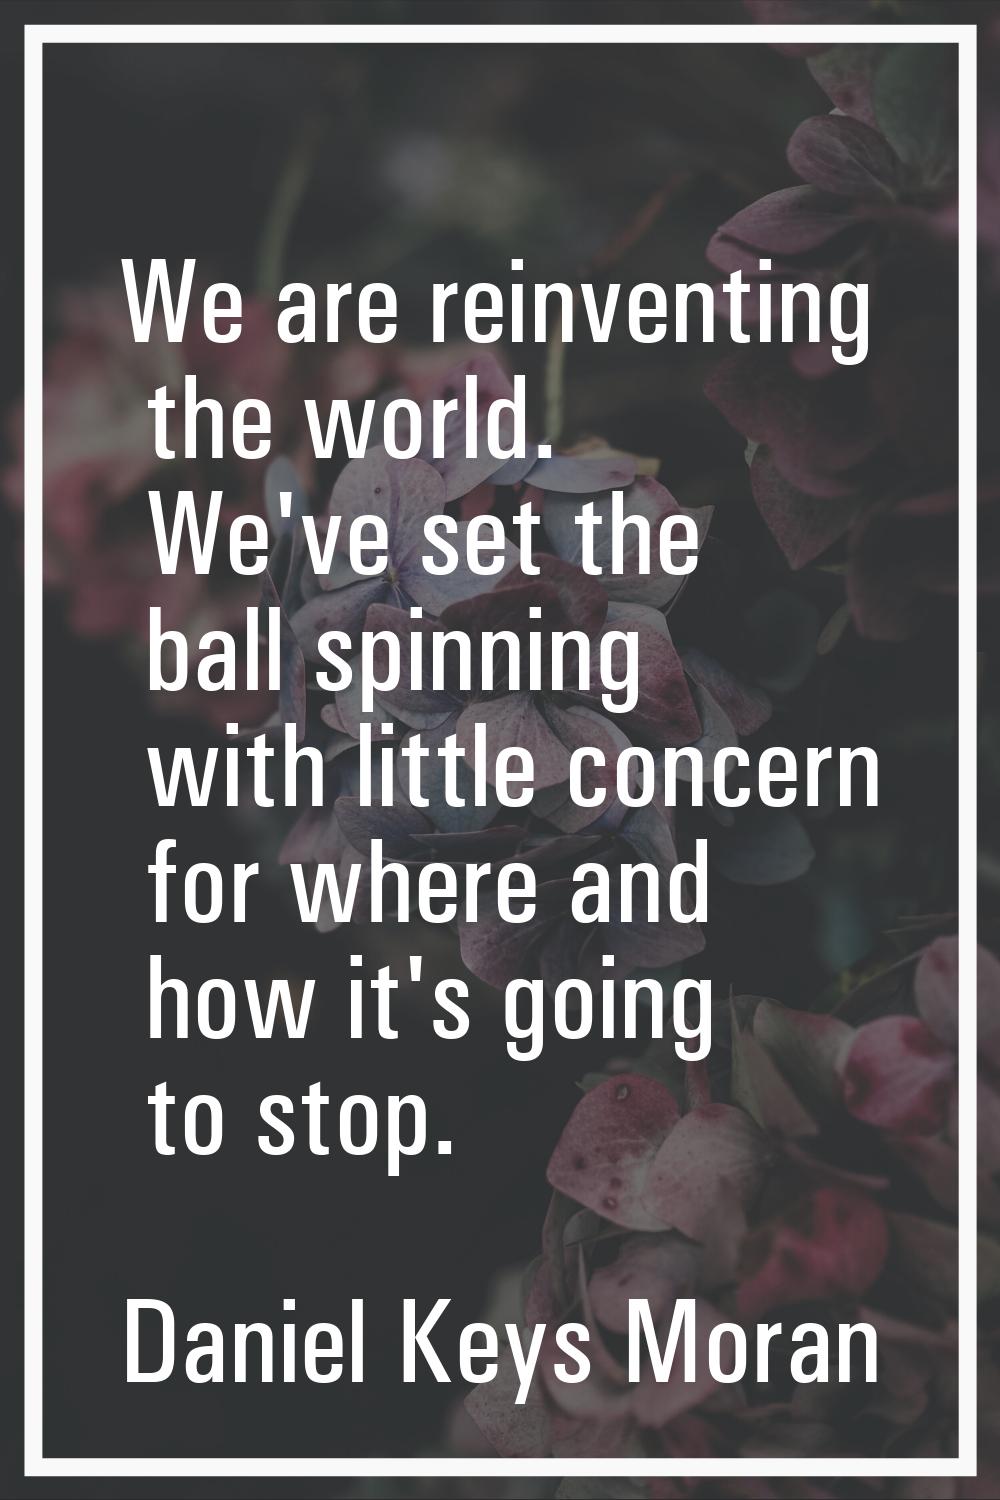 We are reinventing the world. We've set the ball spinning with little concern for where and how it'